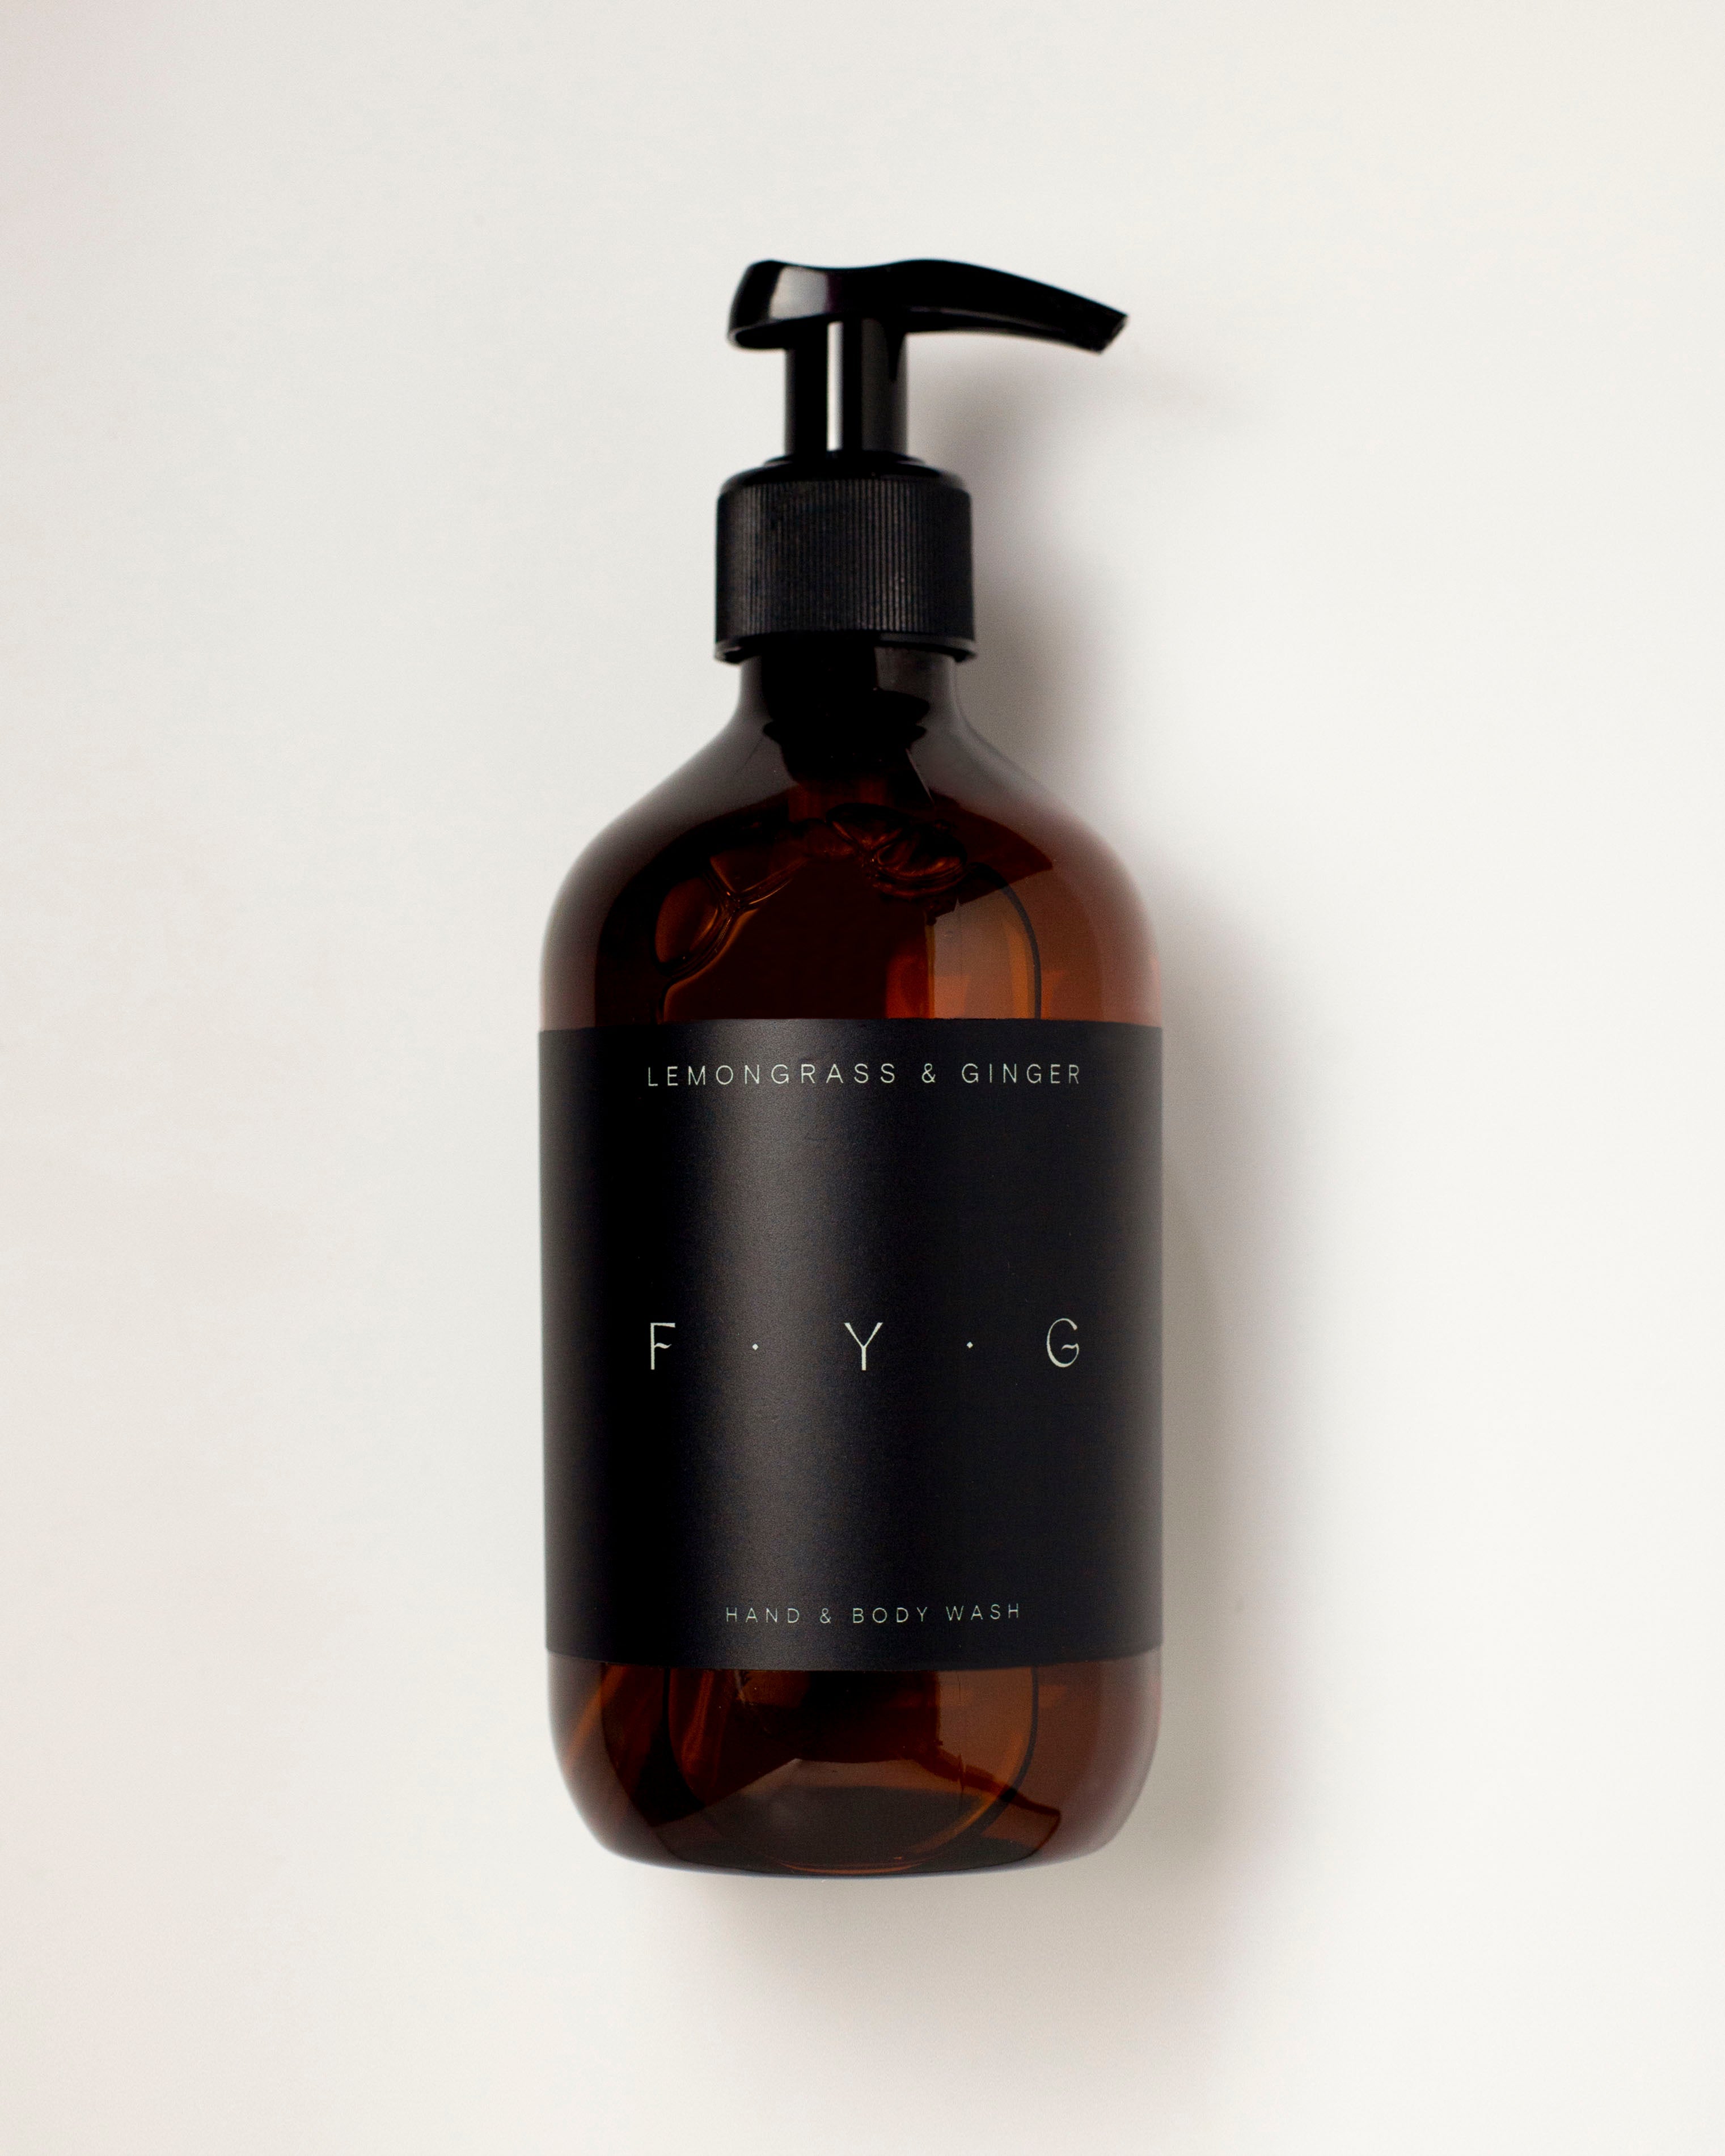 Find Your Glow Lemongrass & Ginger Hand & Body Wash